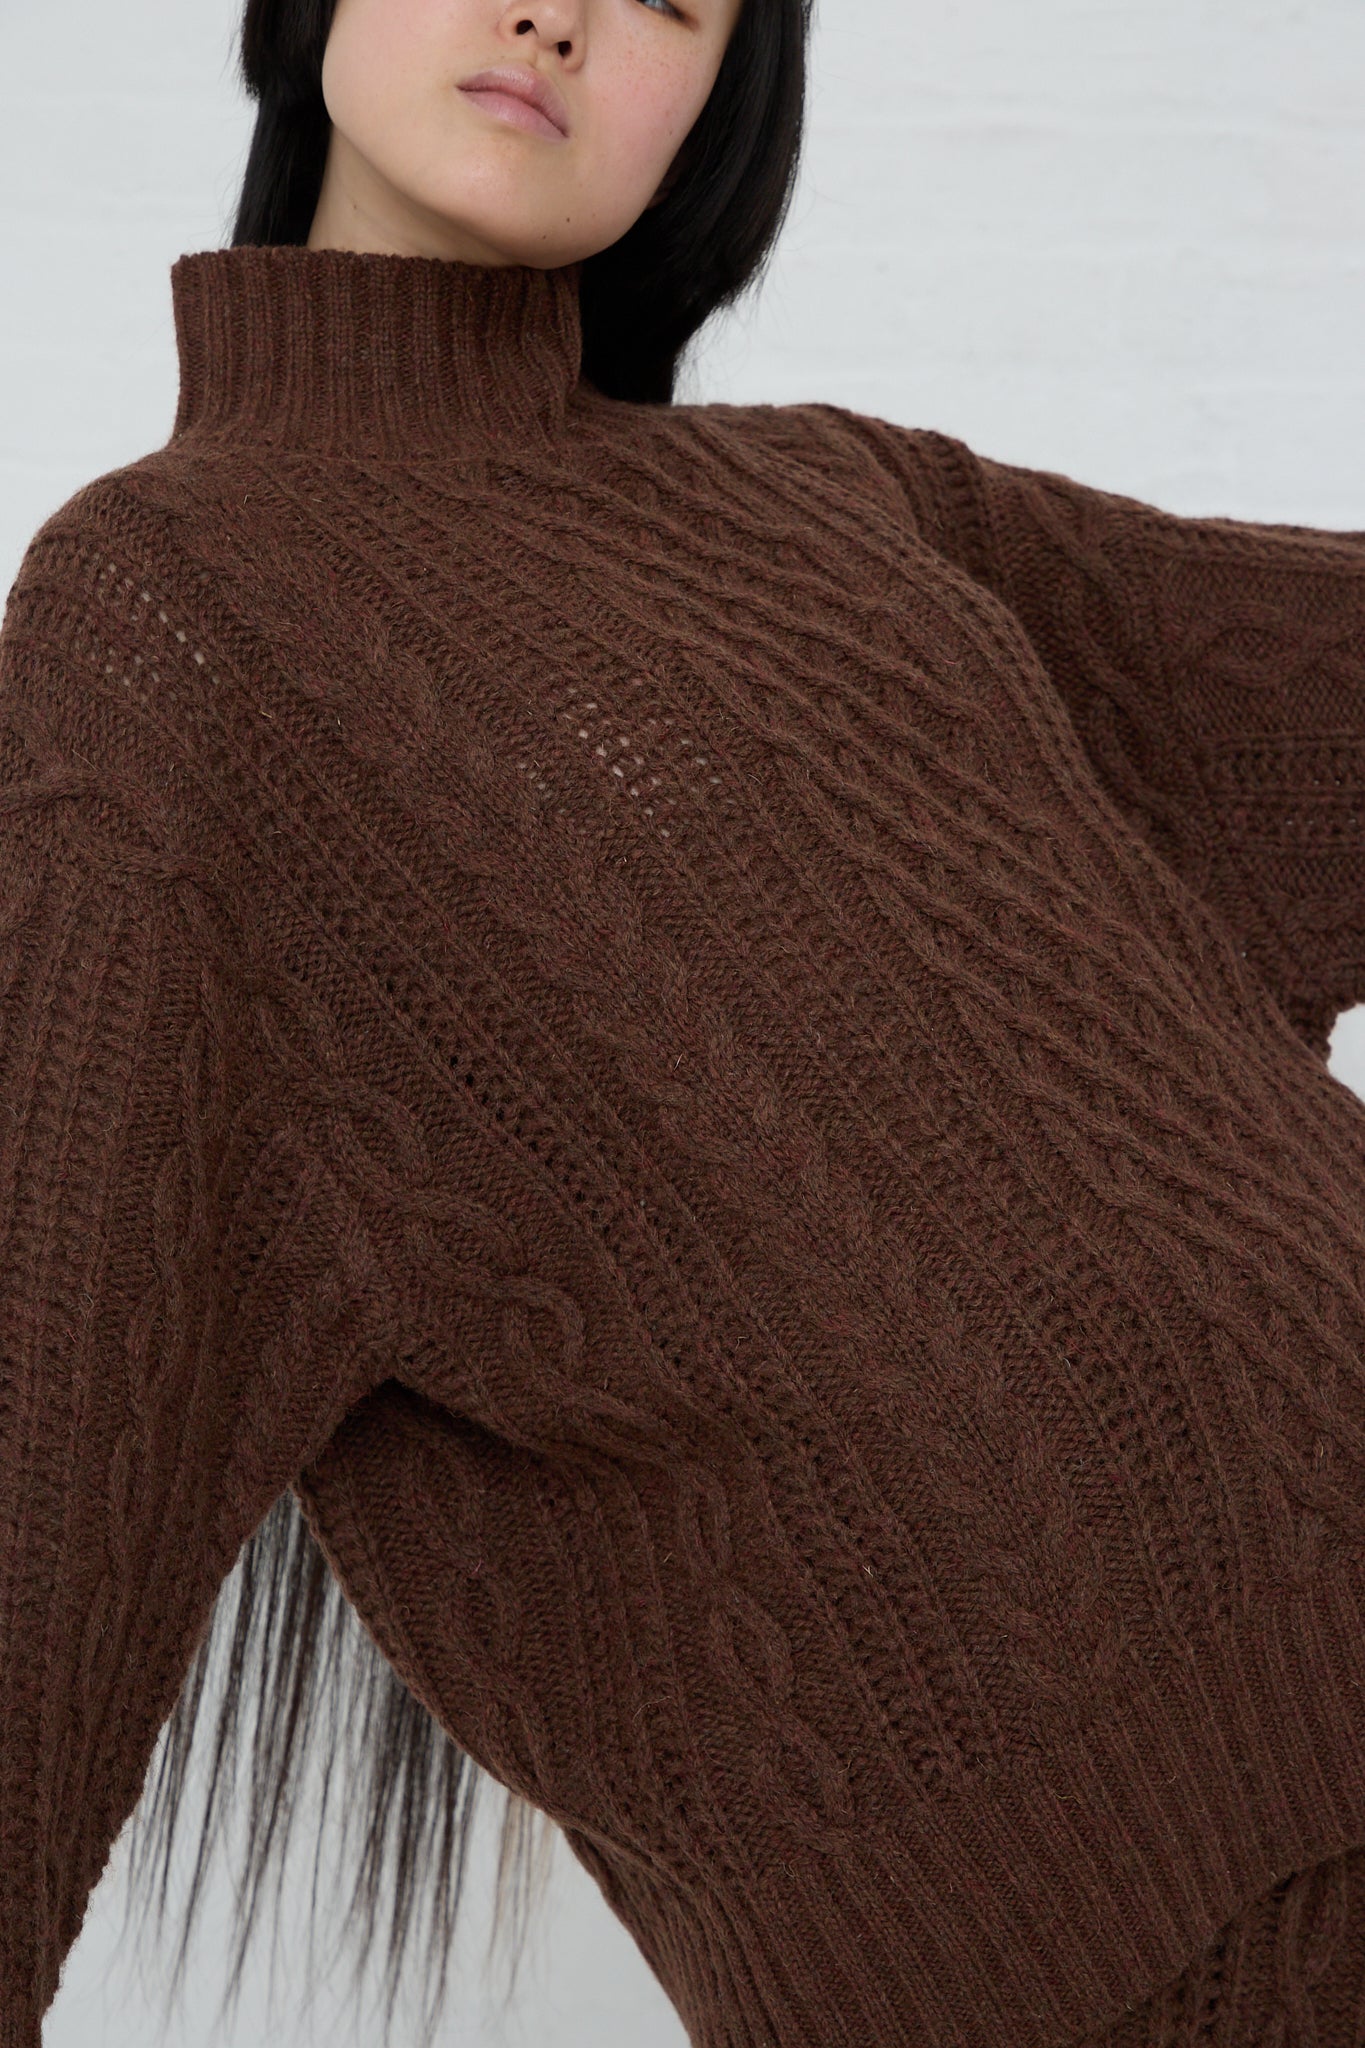 The model is wearing a Ichi Knit Turtleneck Pullover in Brown.